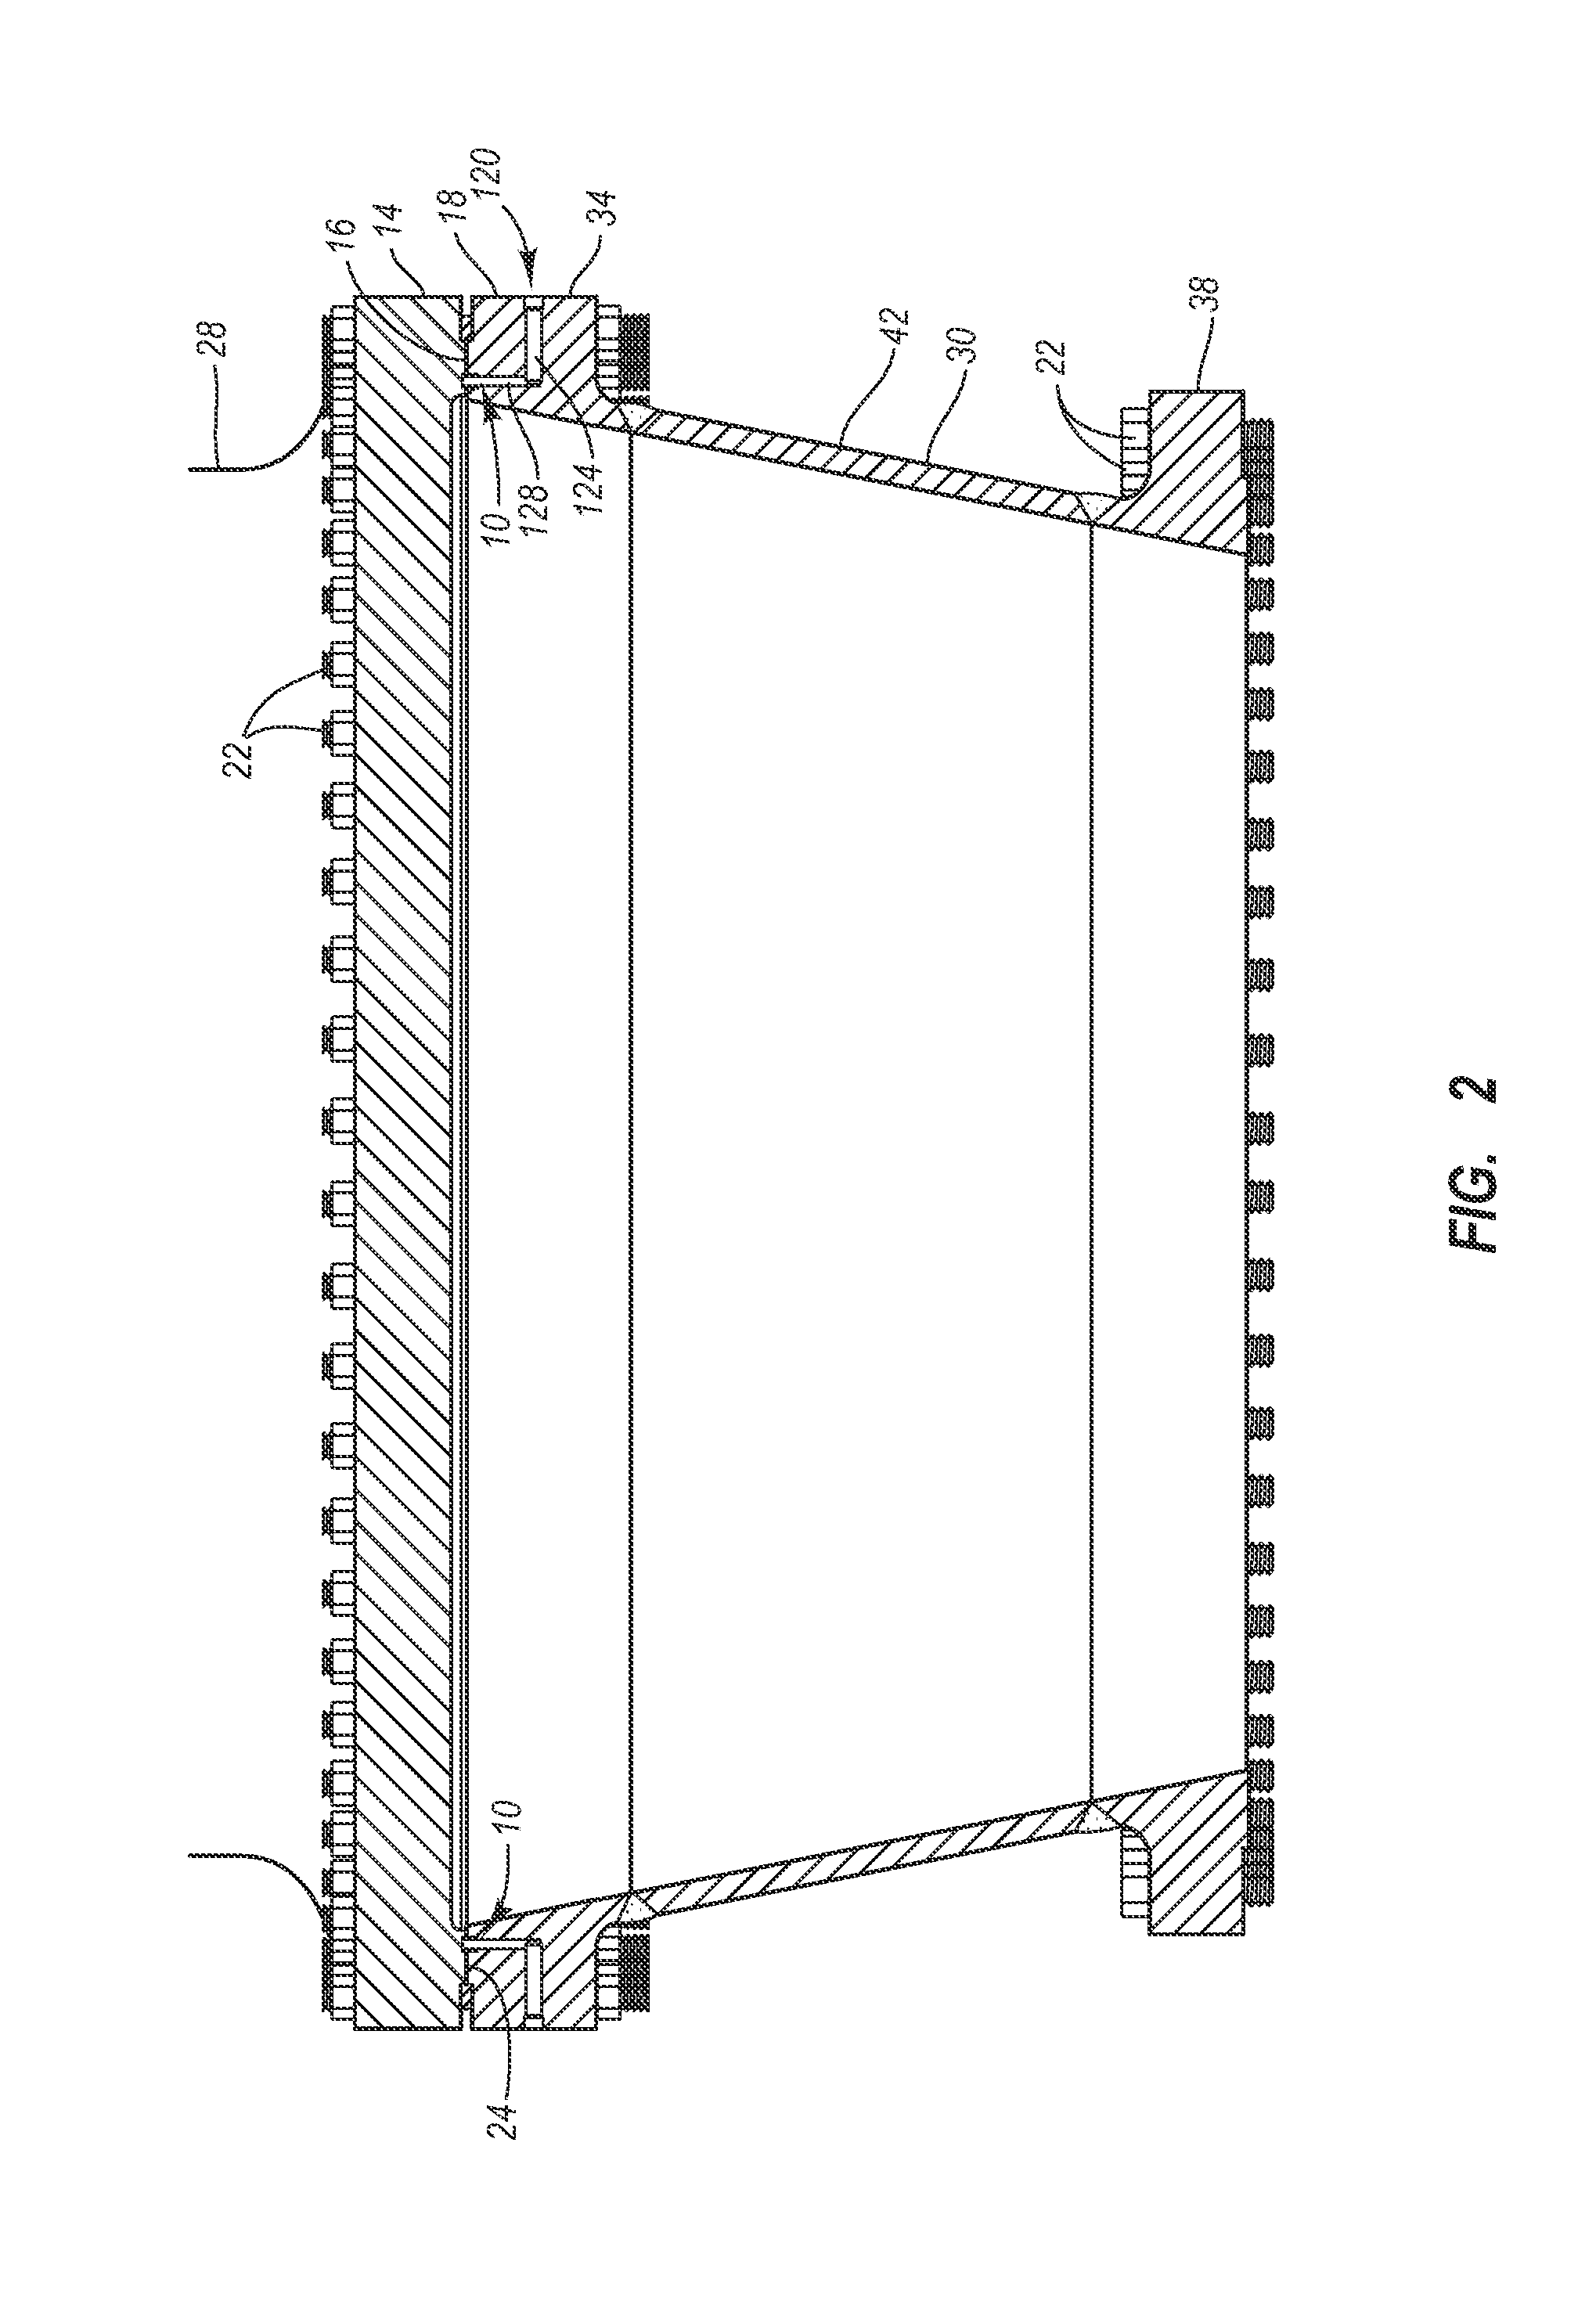 Dynamic flange seal and sealing system